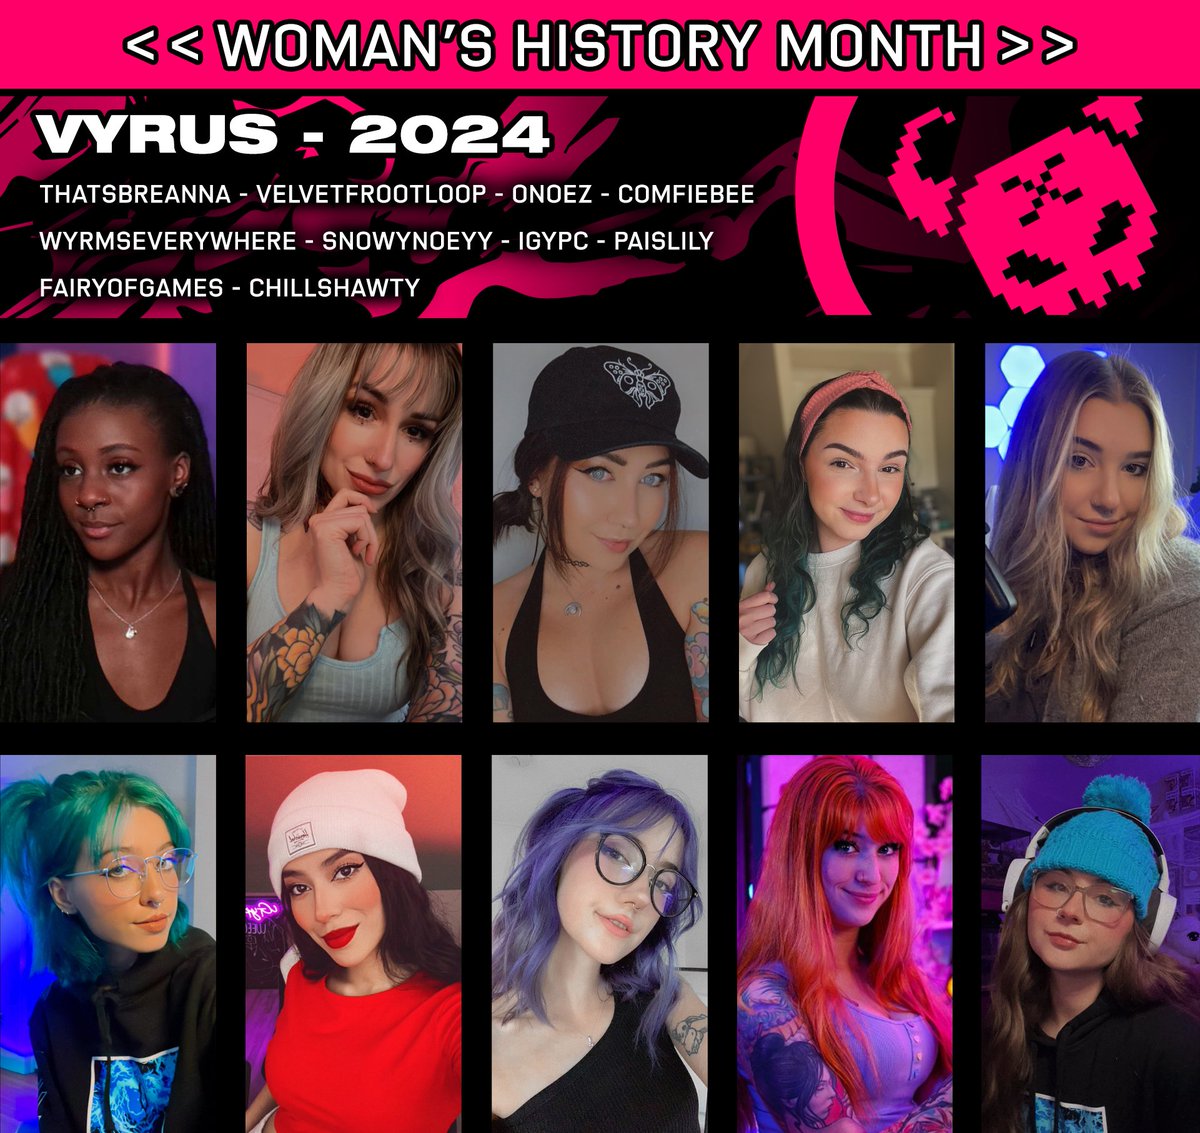 As #WomansHistoryMonth comes to close, let's recognize the strong powerful women in Vyrus. Here's to supporting & empowering each other, every day! 
@thatsbreanna @vfrootloop @ttvonoez @comfiebeetv @WyrmsEverywhere @snowynoeyy @ItsGypC @paislilyy @fairy_of_games @ChillShawtyTV